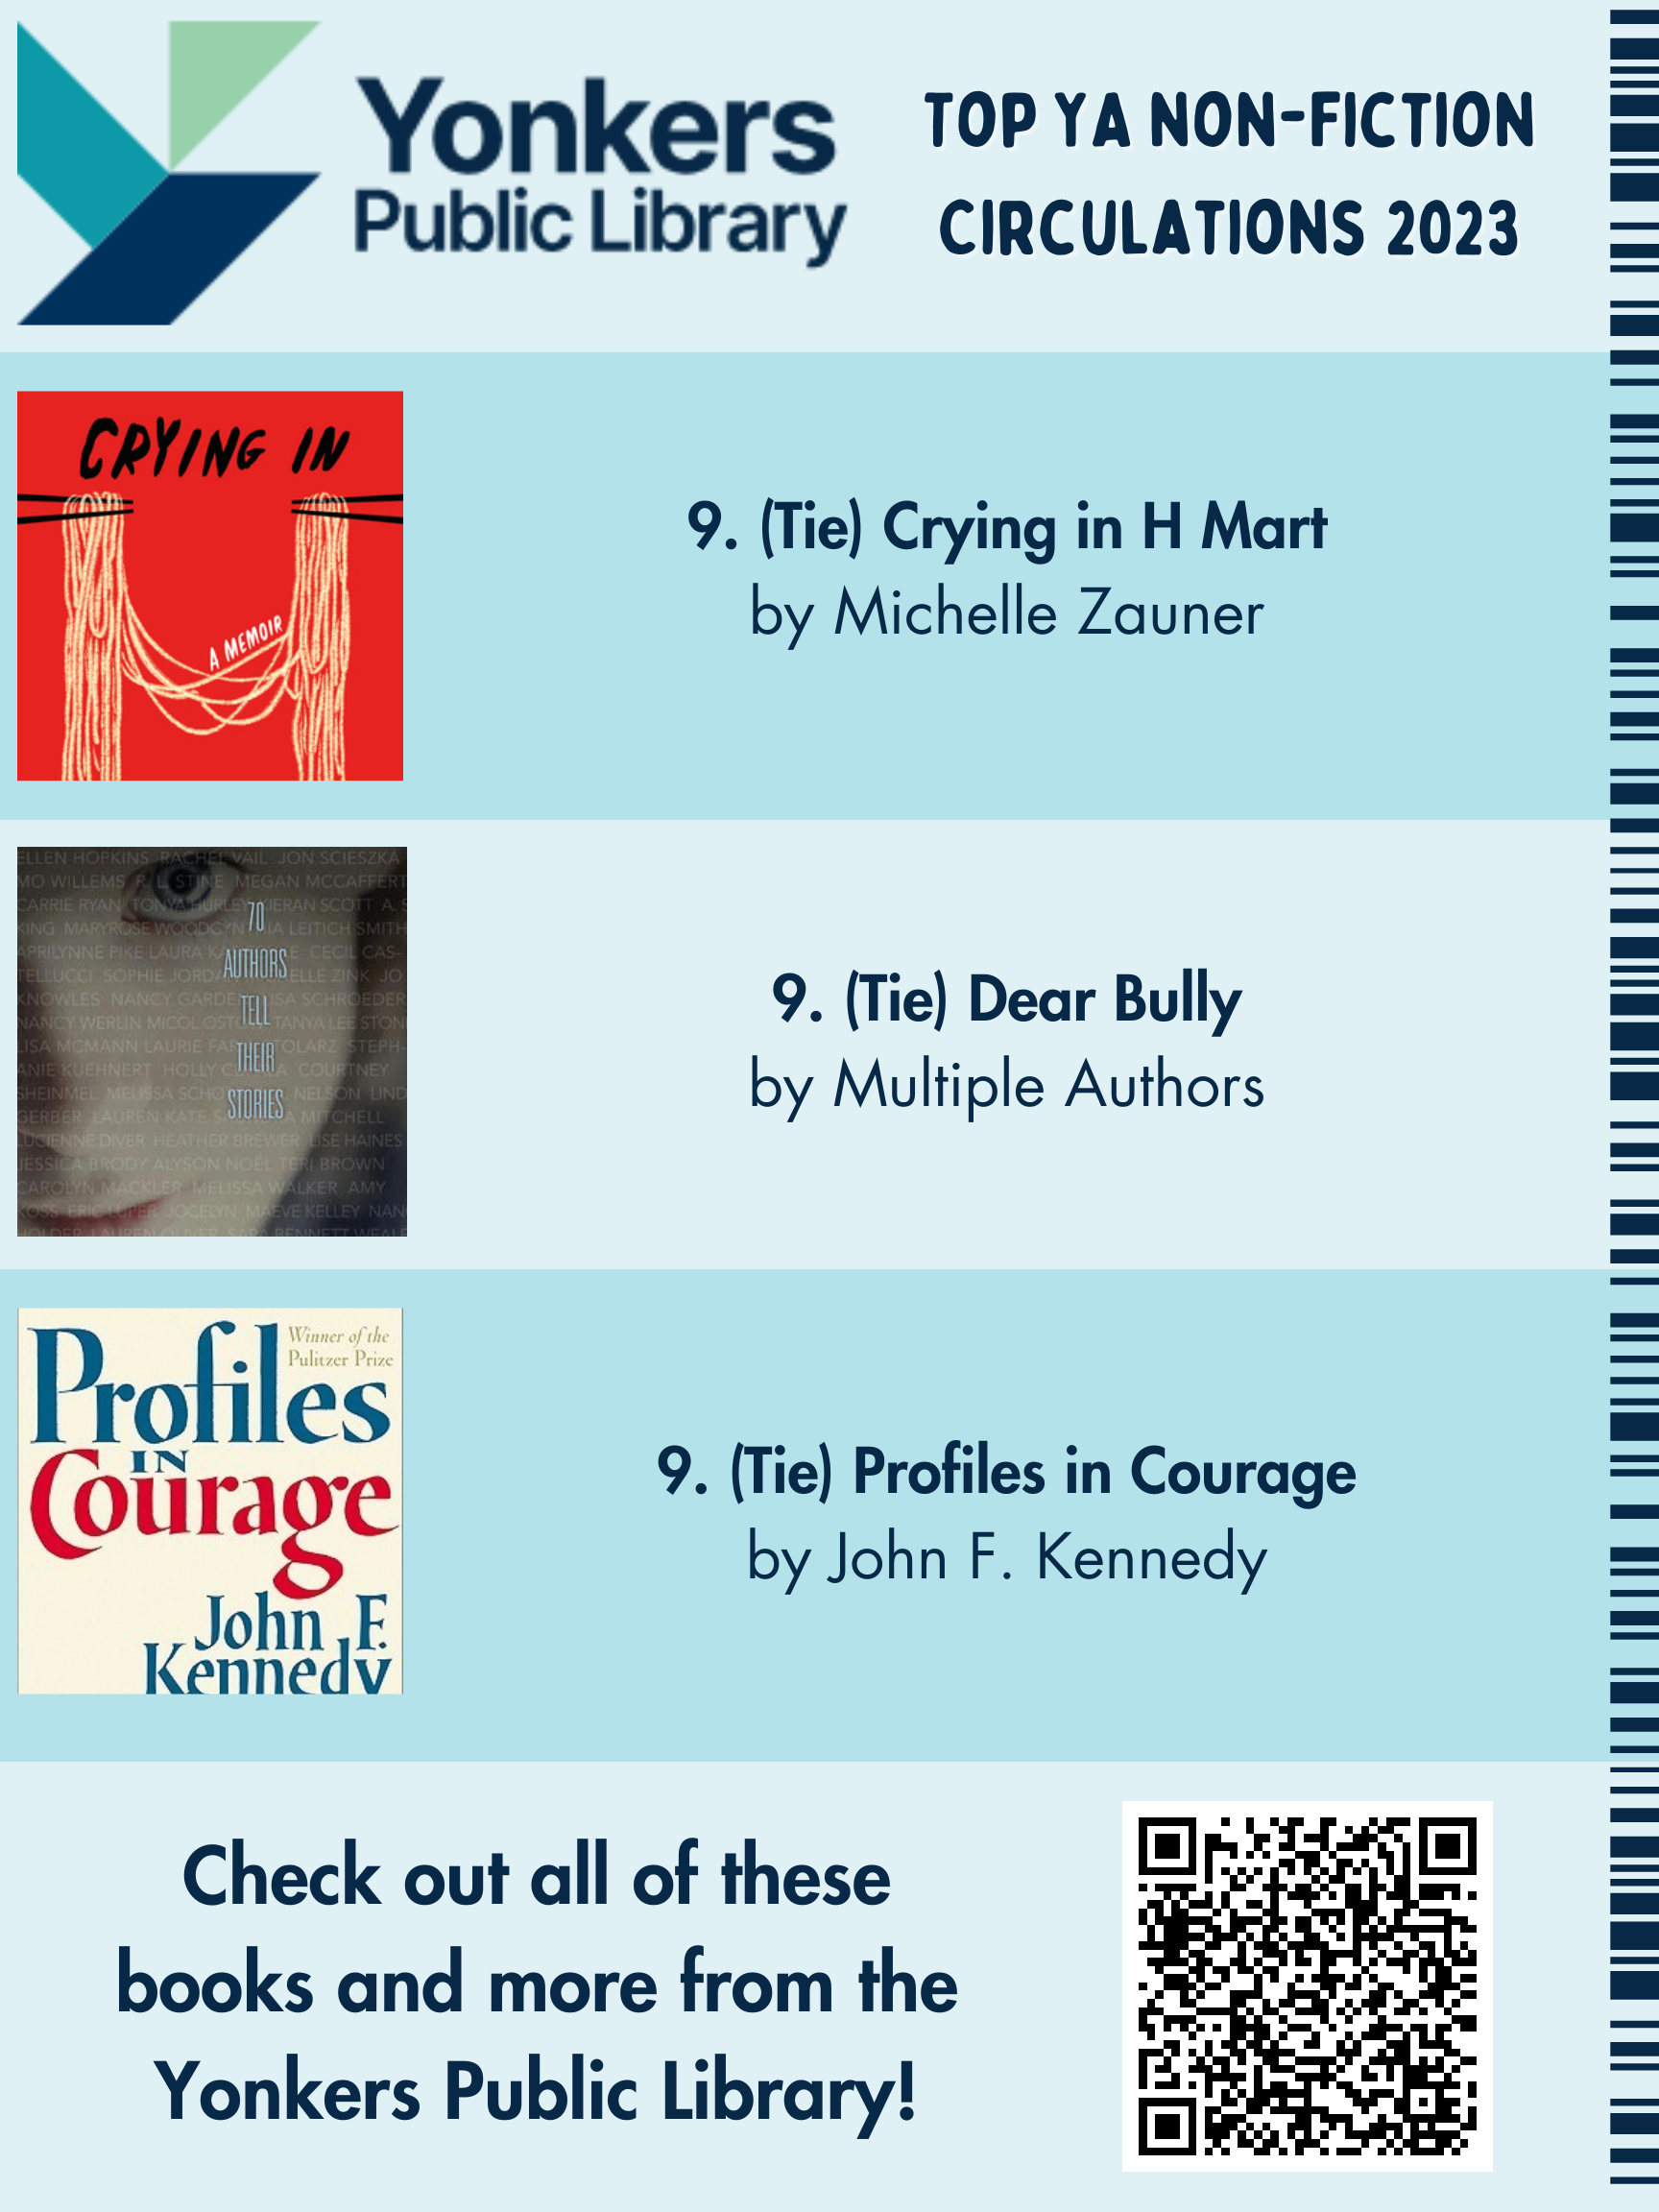 Top YA Non-Fiction Circulations 2023. Crying in H Mart, Dear Bully, Profiles in Courage.